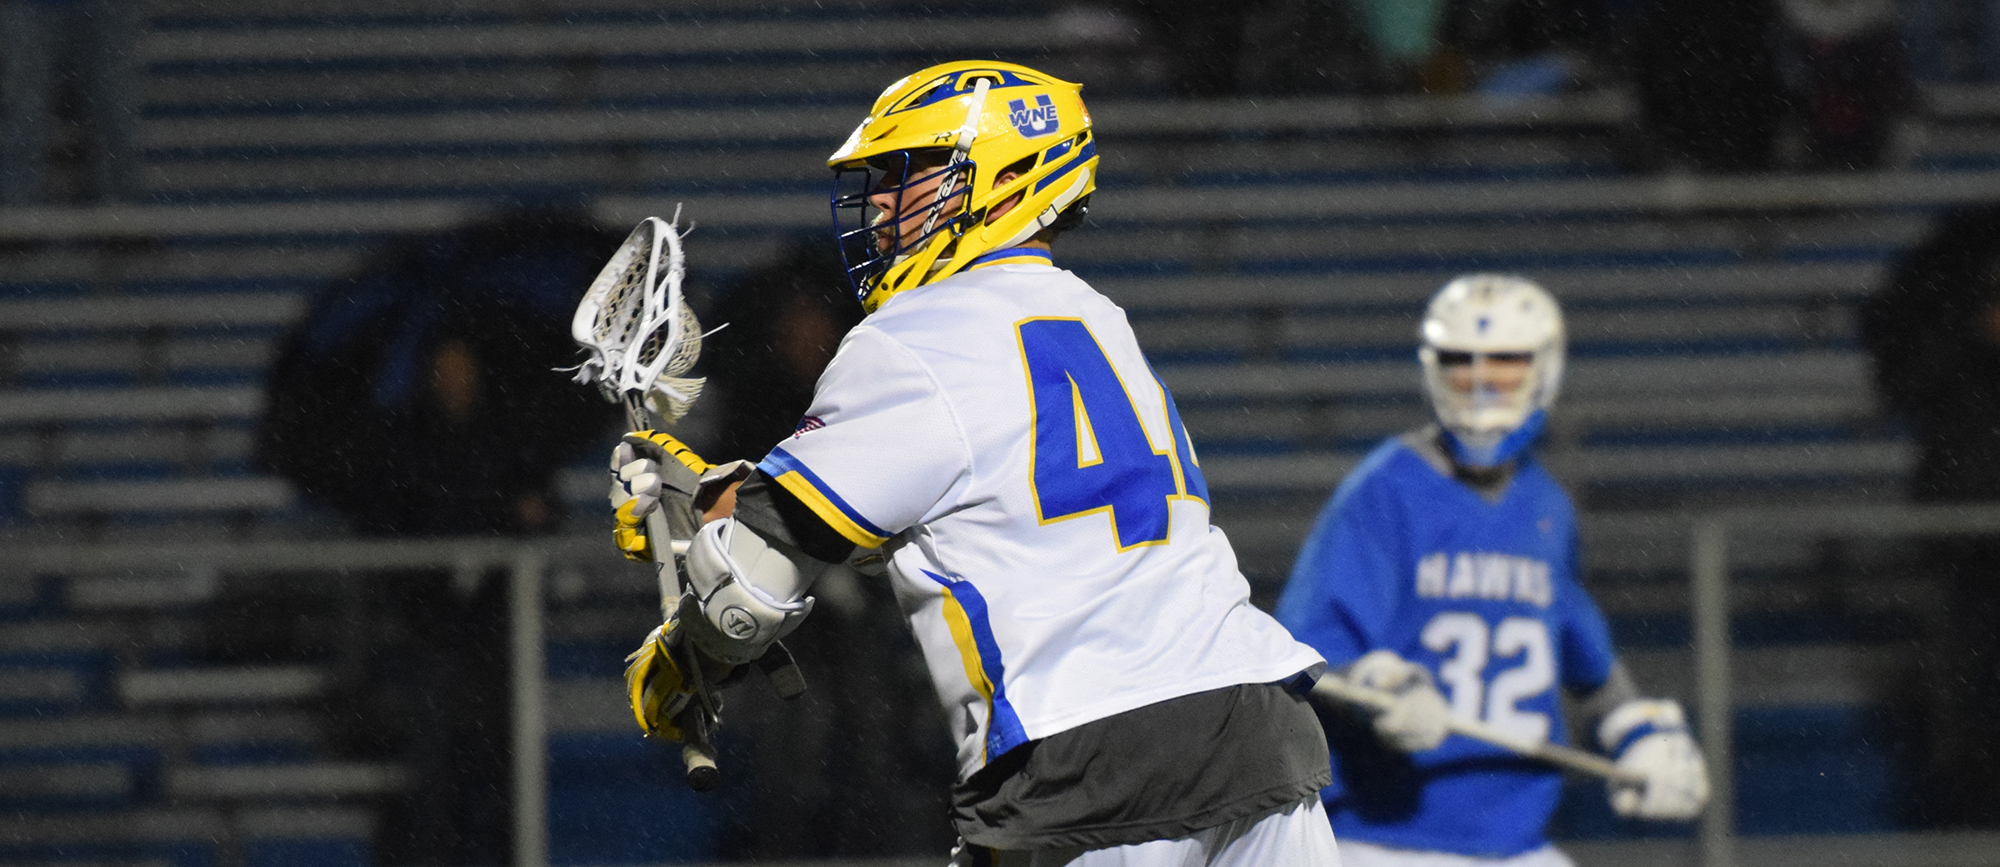 Senior Frank Medlicott scored a career-high five goals in Western New England's 17-8 win over Roger Williams on Wednesday.  (Photo by Rachael Margossian)